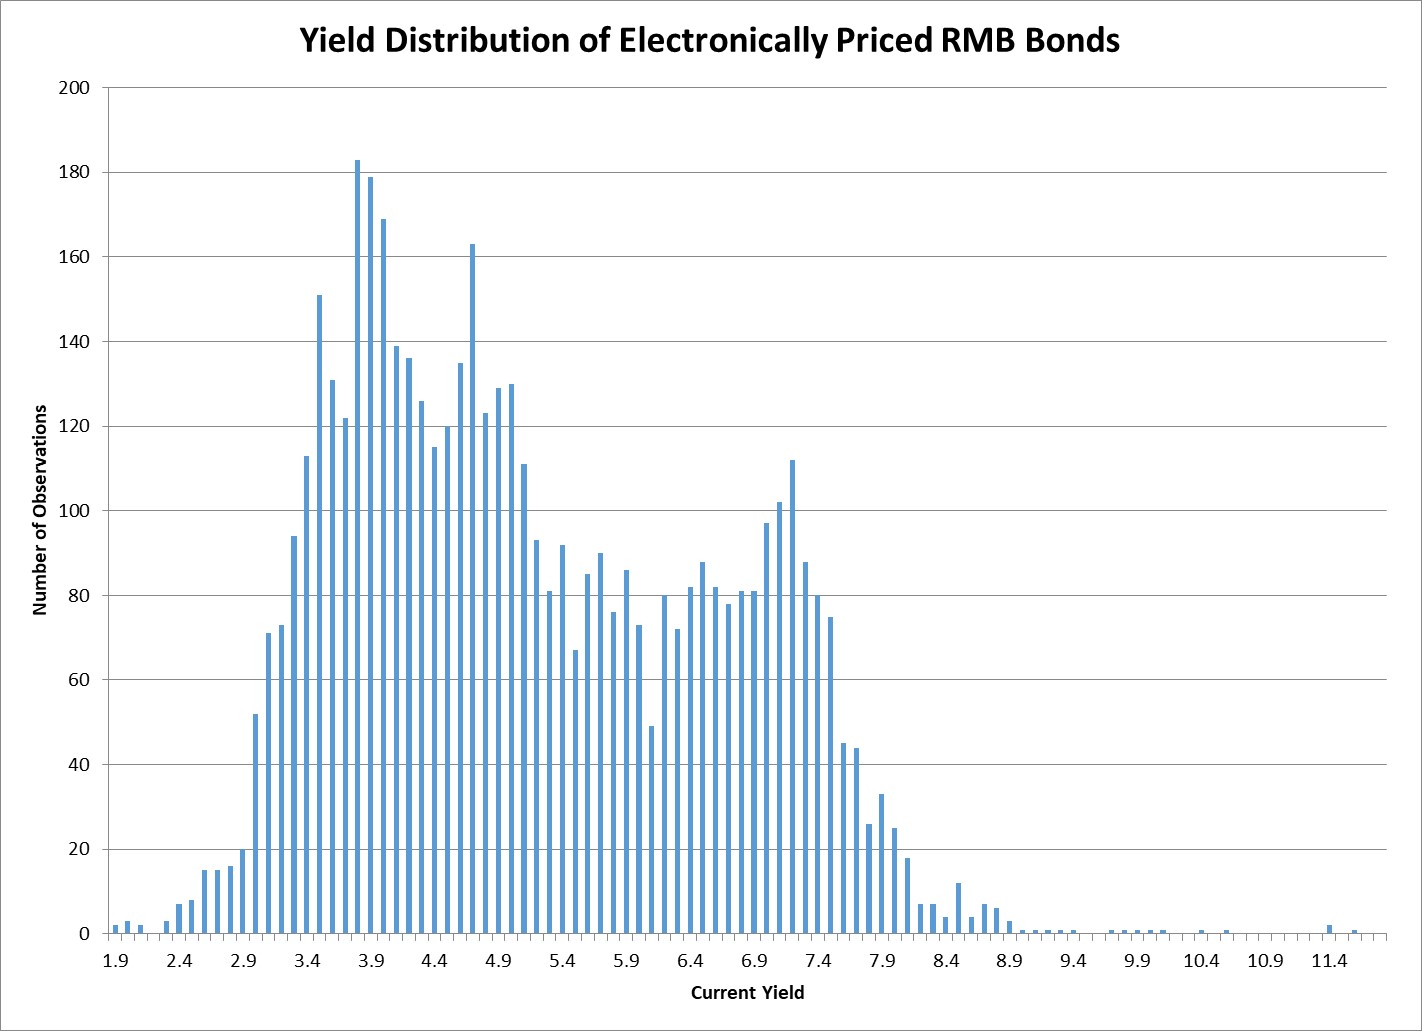 Yield Distribution of Electronically Priced RMB Bonds